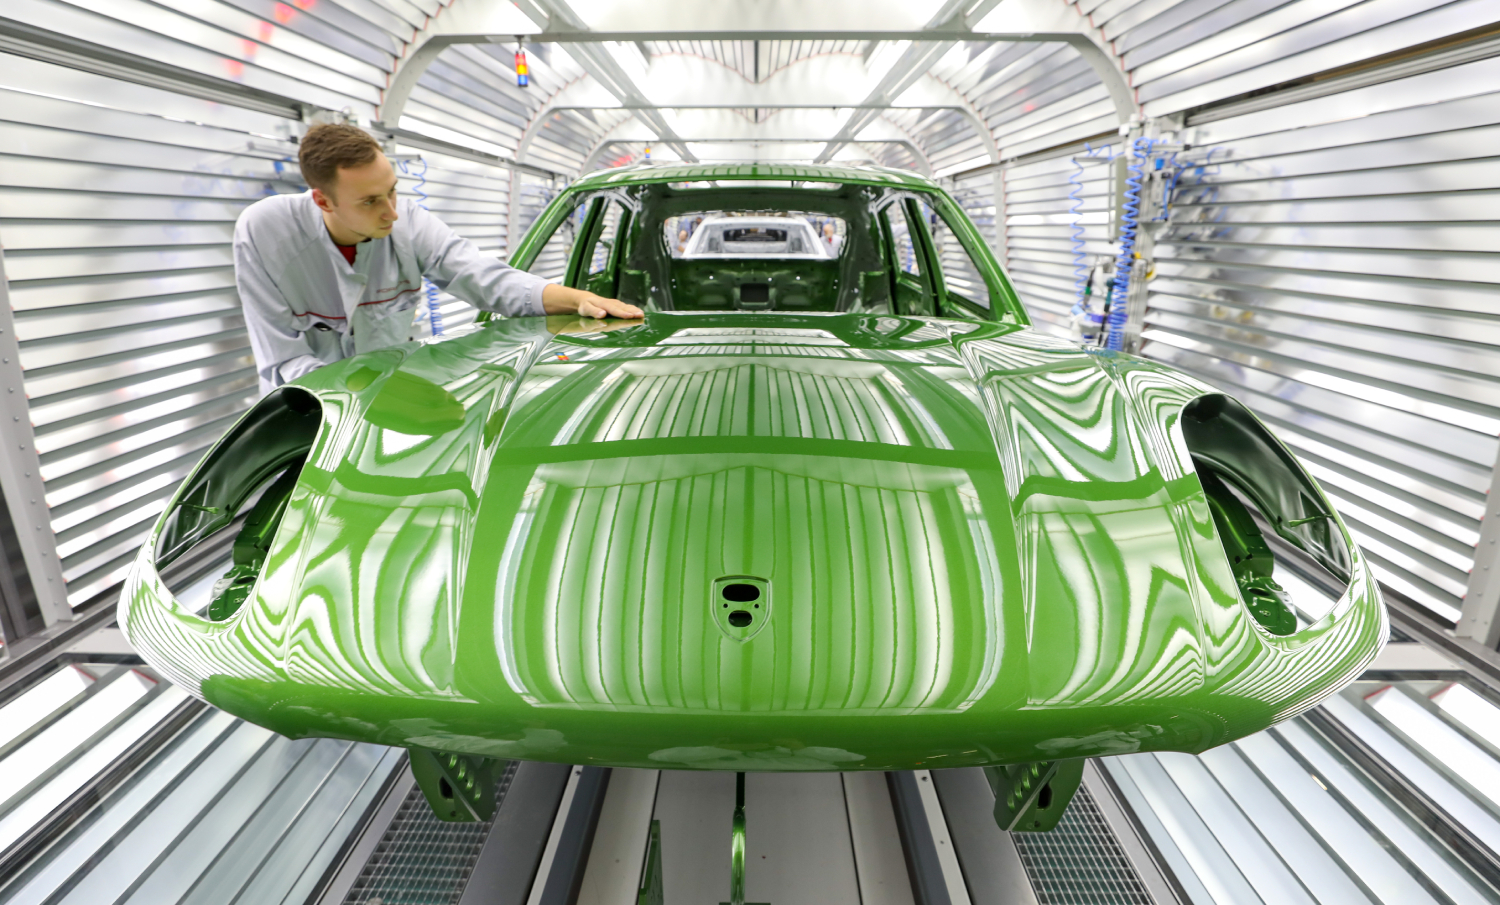 A bright green Porsche Macan on the assembly line